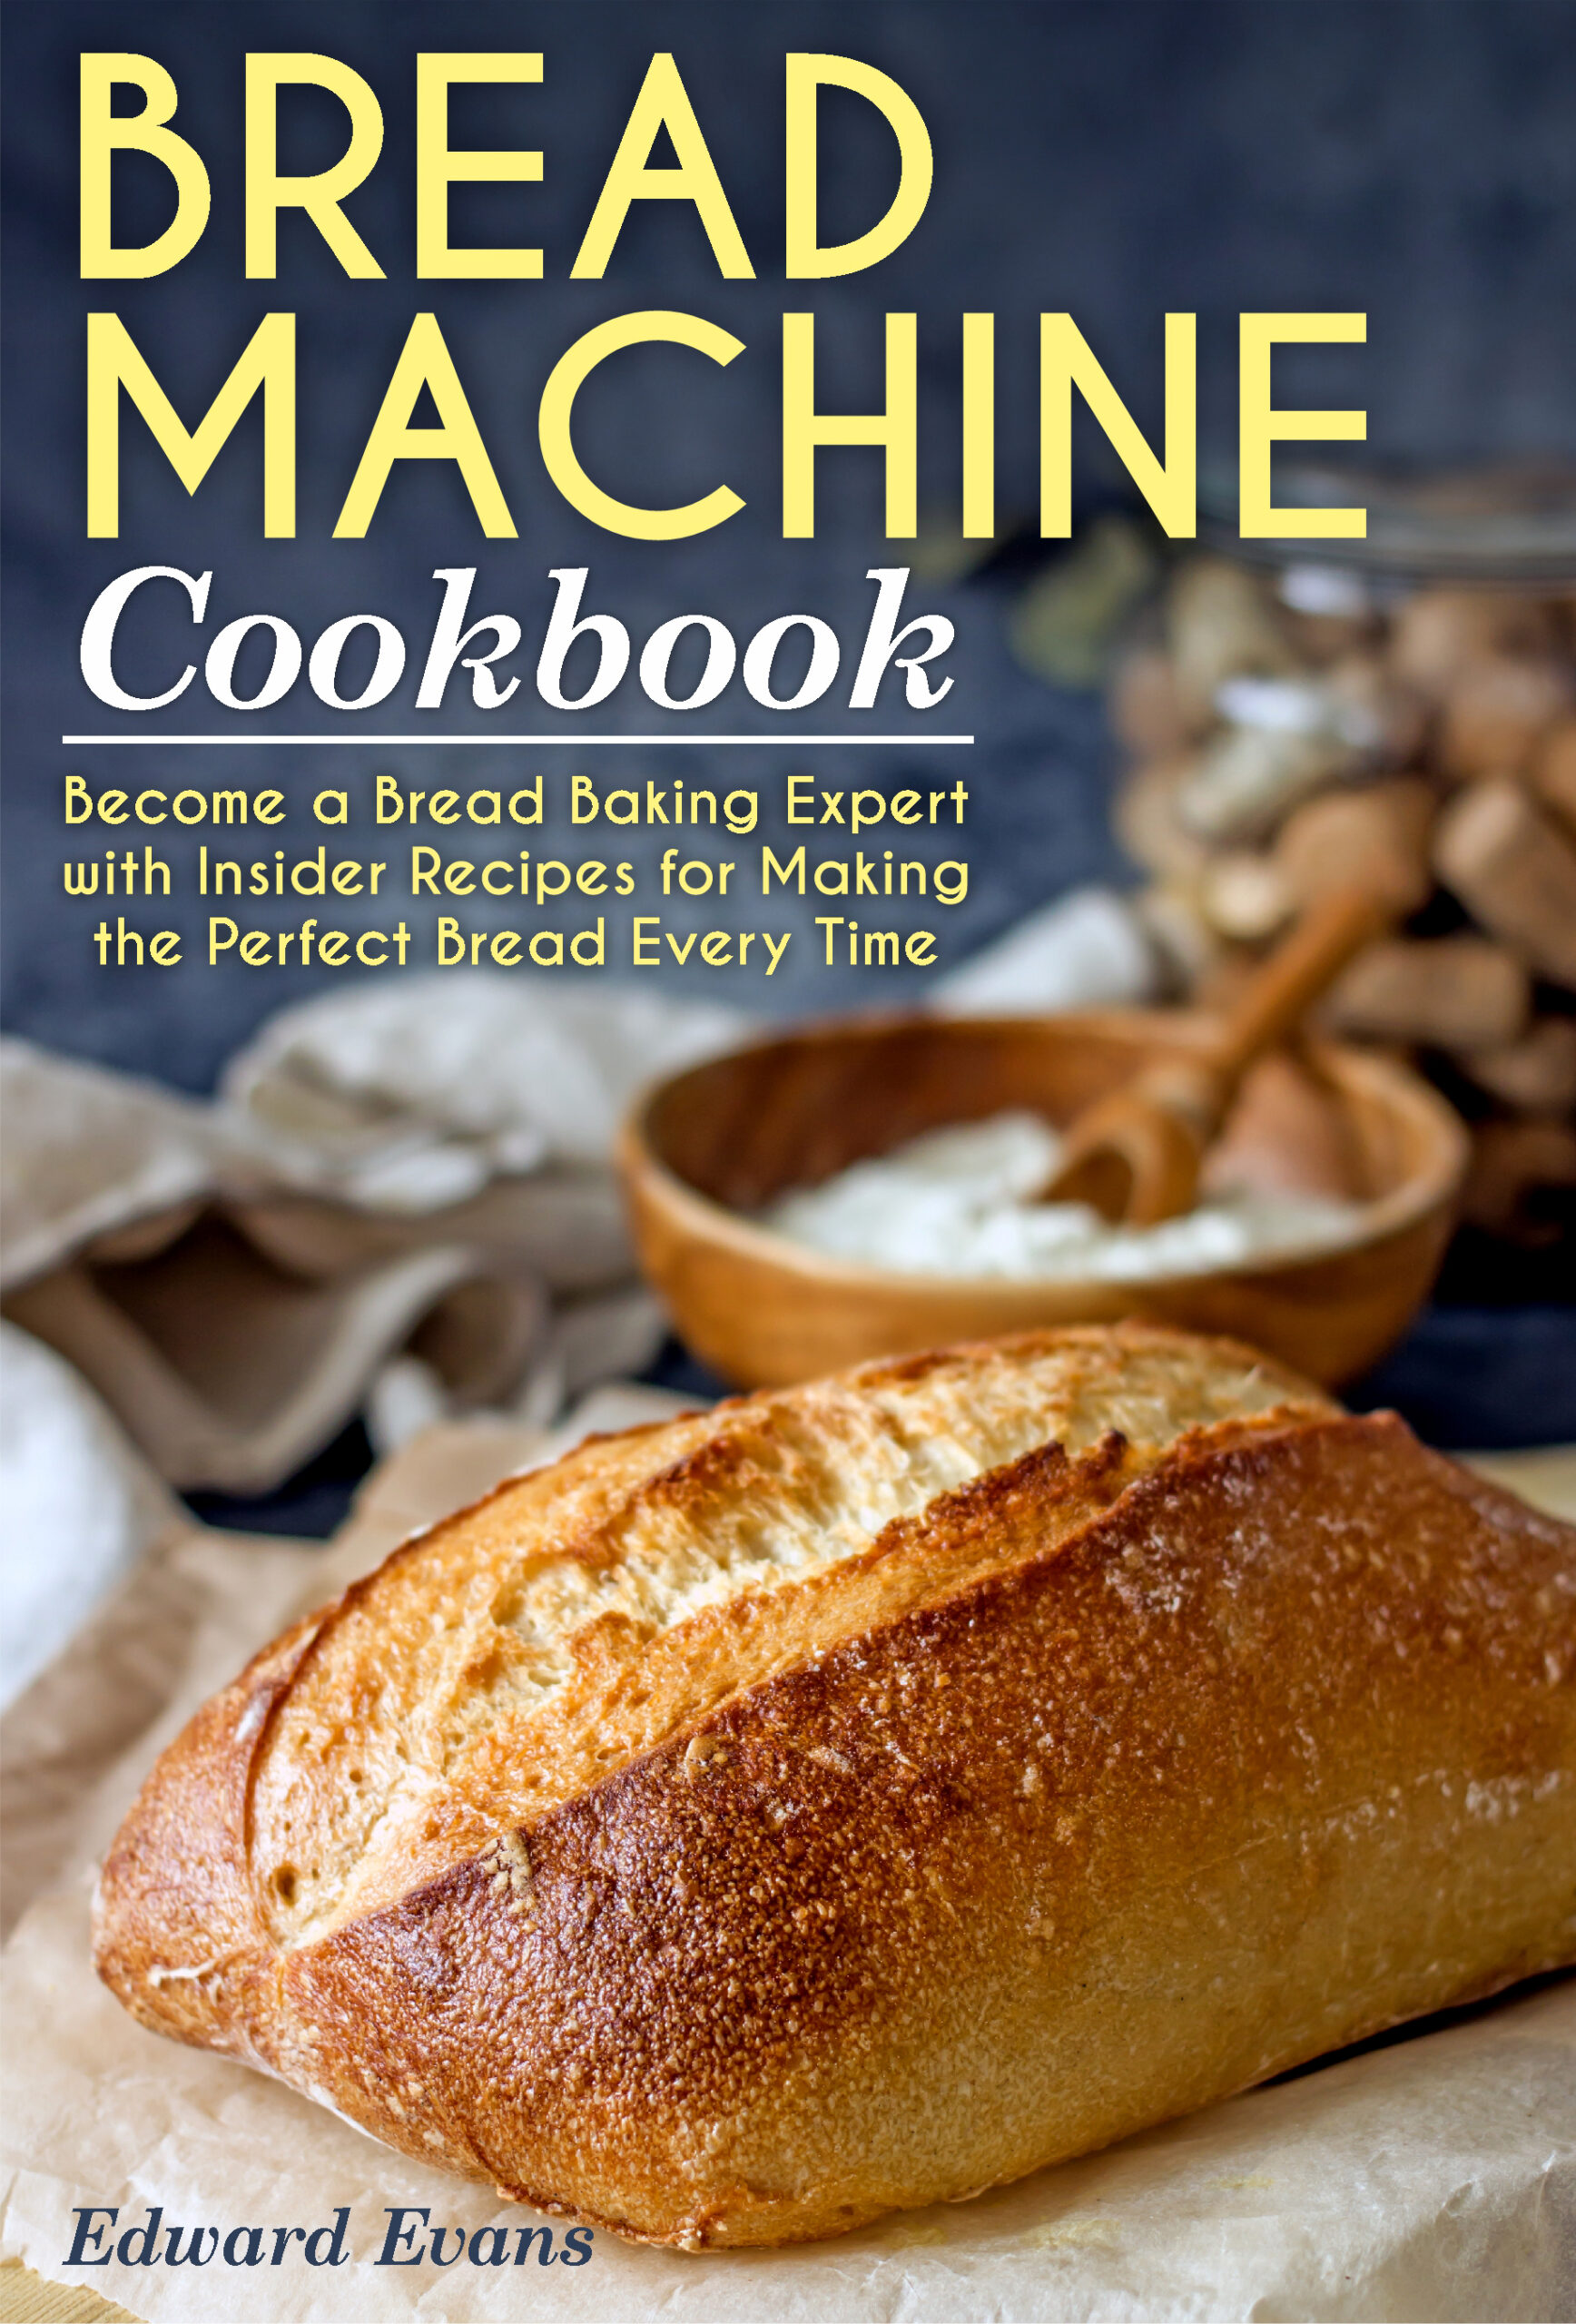 FREE: Bread Machine Cookbook: Become a Bread Baking Expert with Insider Recipes for Making the Perfect Bread Every Time by Edward Evans